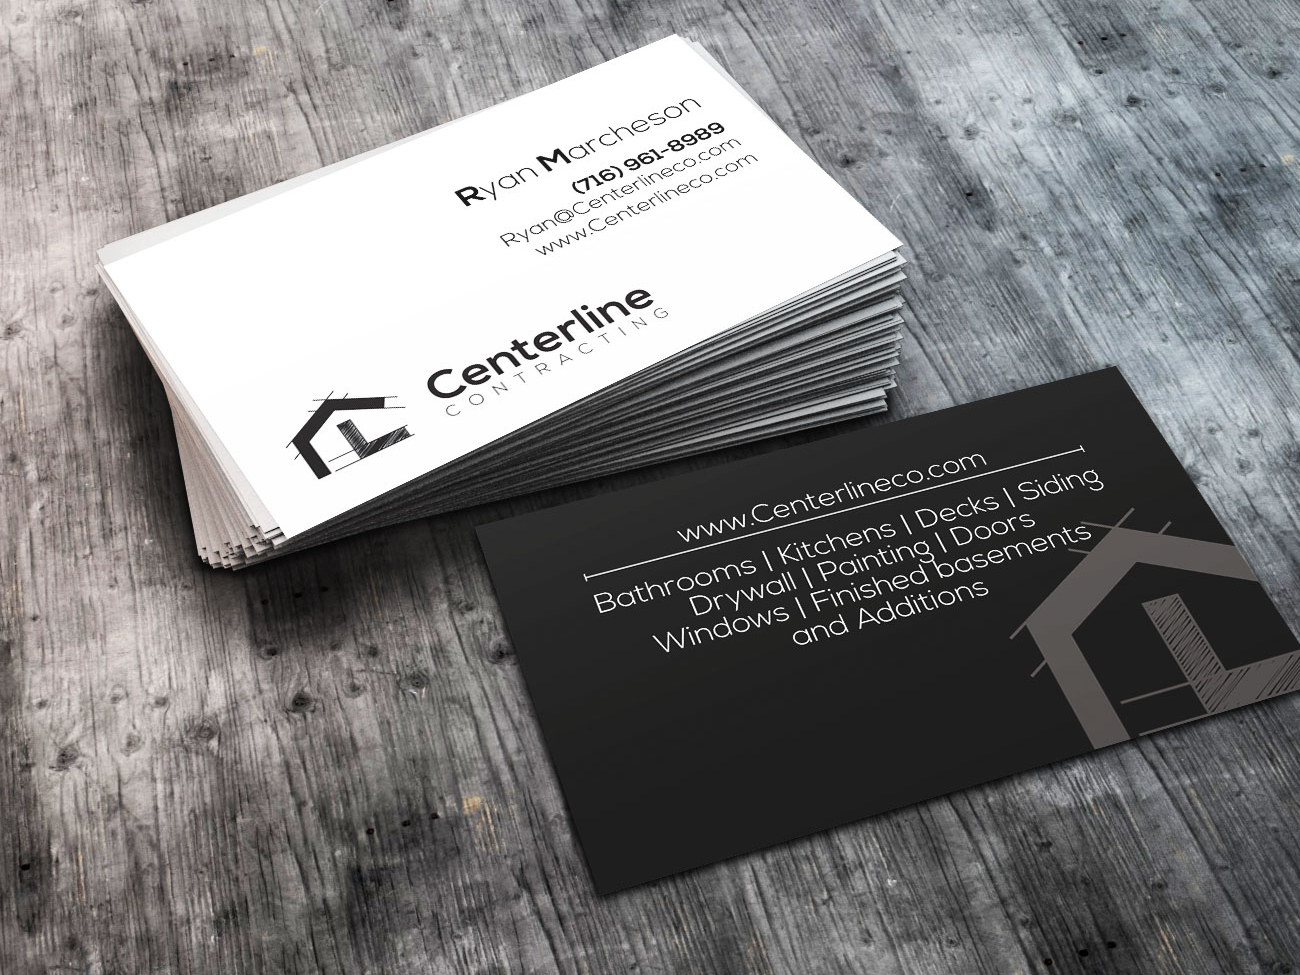 Logo Business Card For Centerline Contracting By Alam